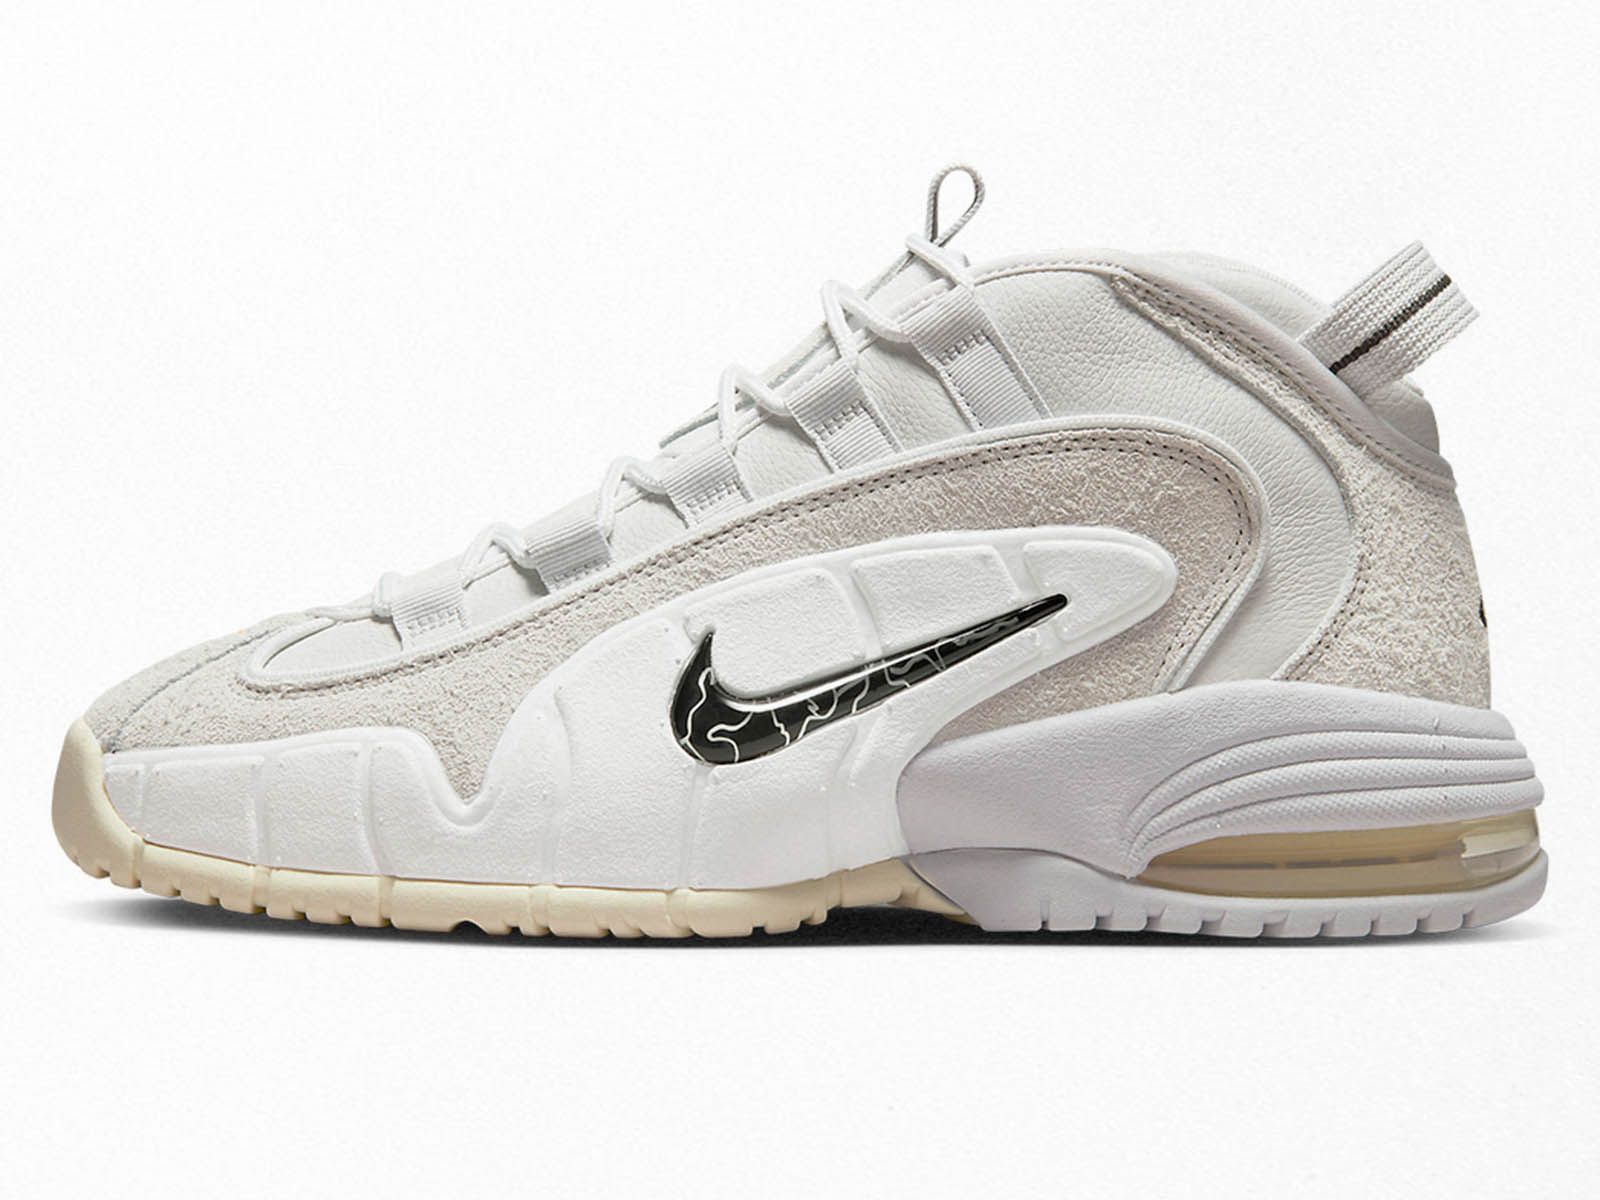 Nike Air Max Penny 1 arrives in a new colourway